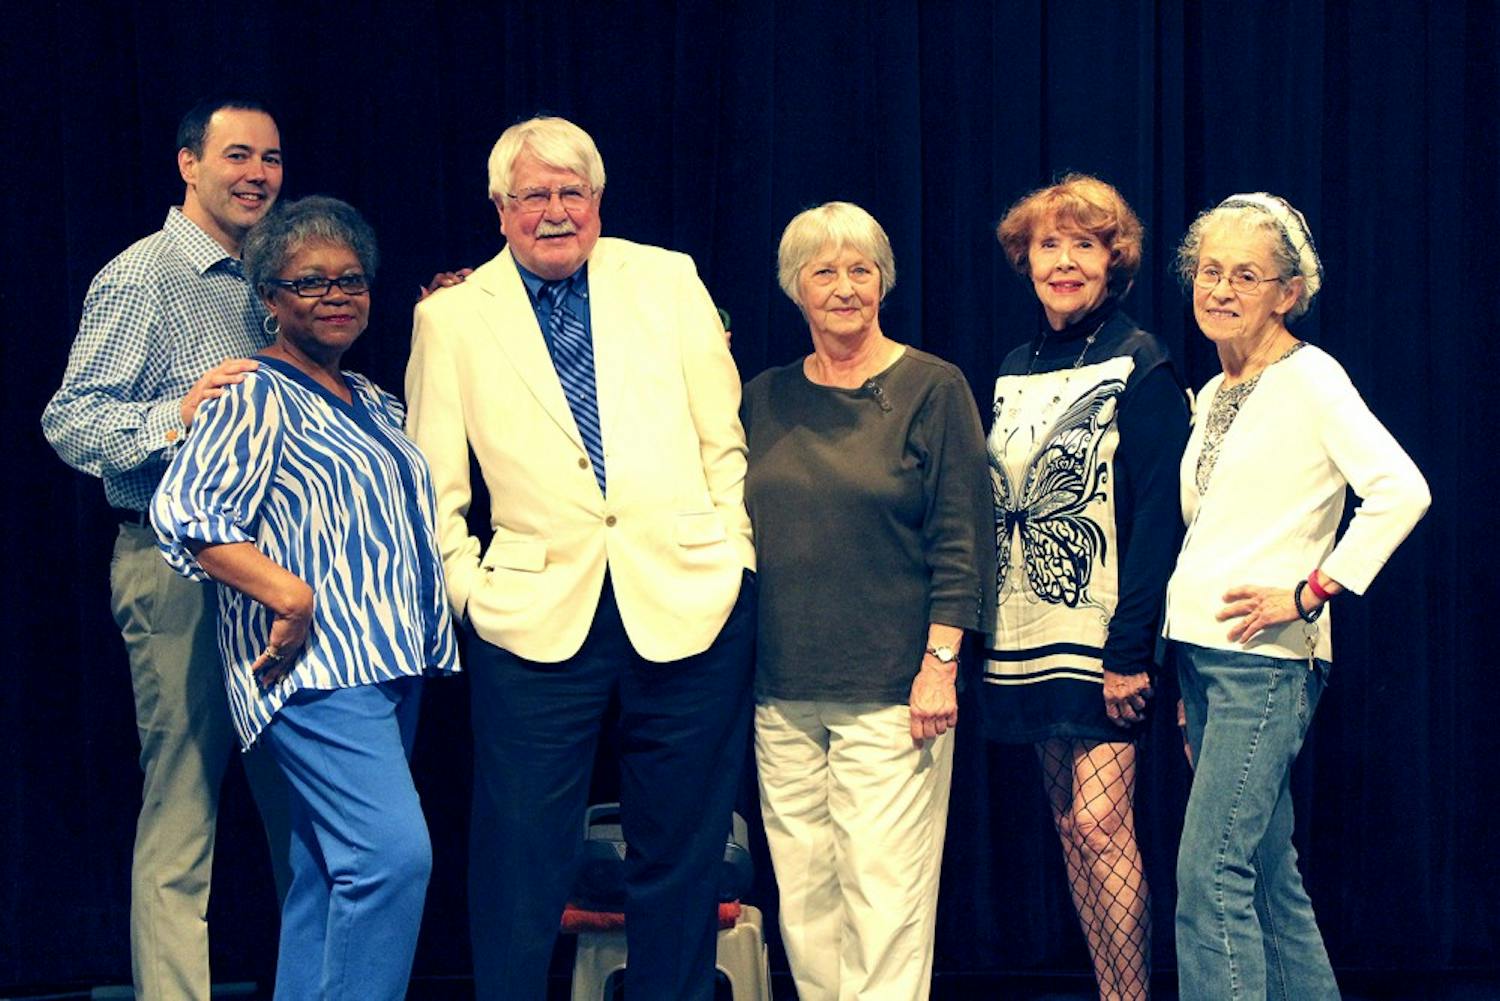 Participants in the Fashion Show at the Seymour Senior Center pose for a picture after a dress rehearsal.